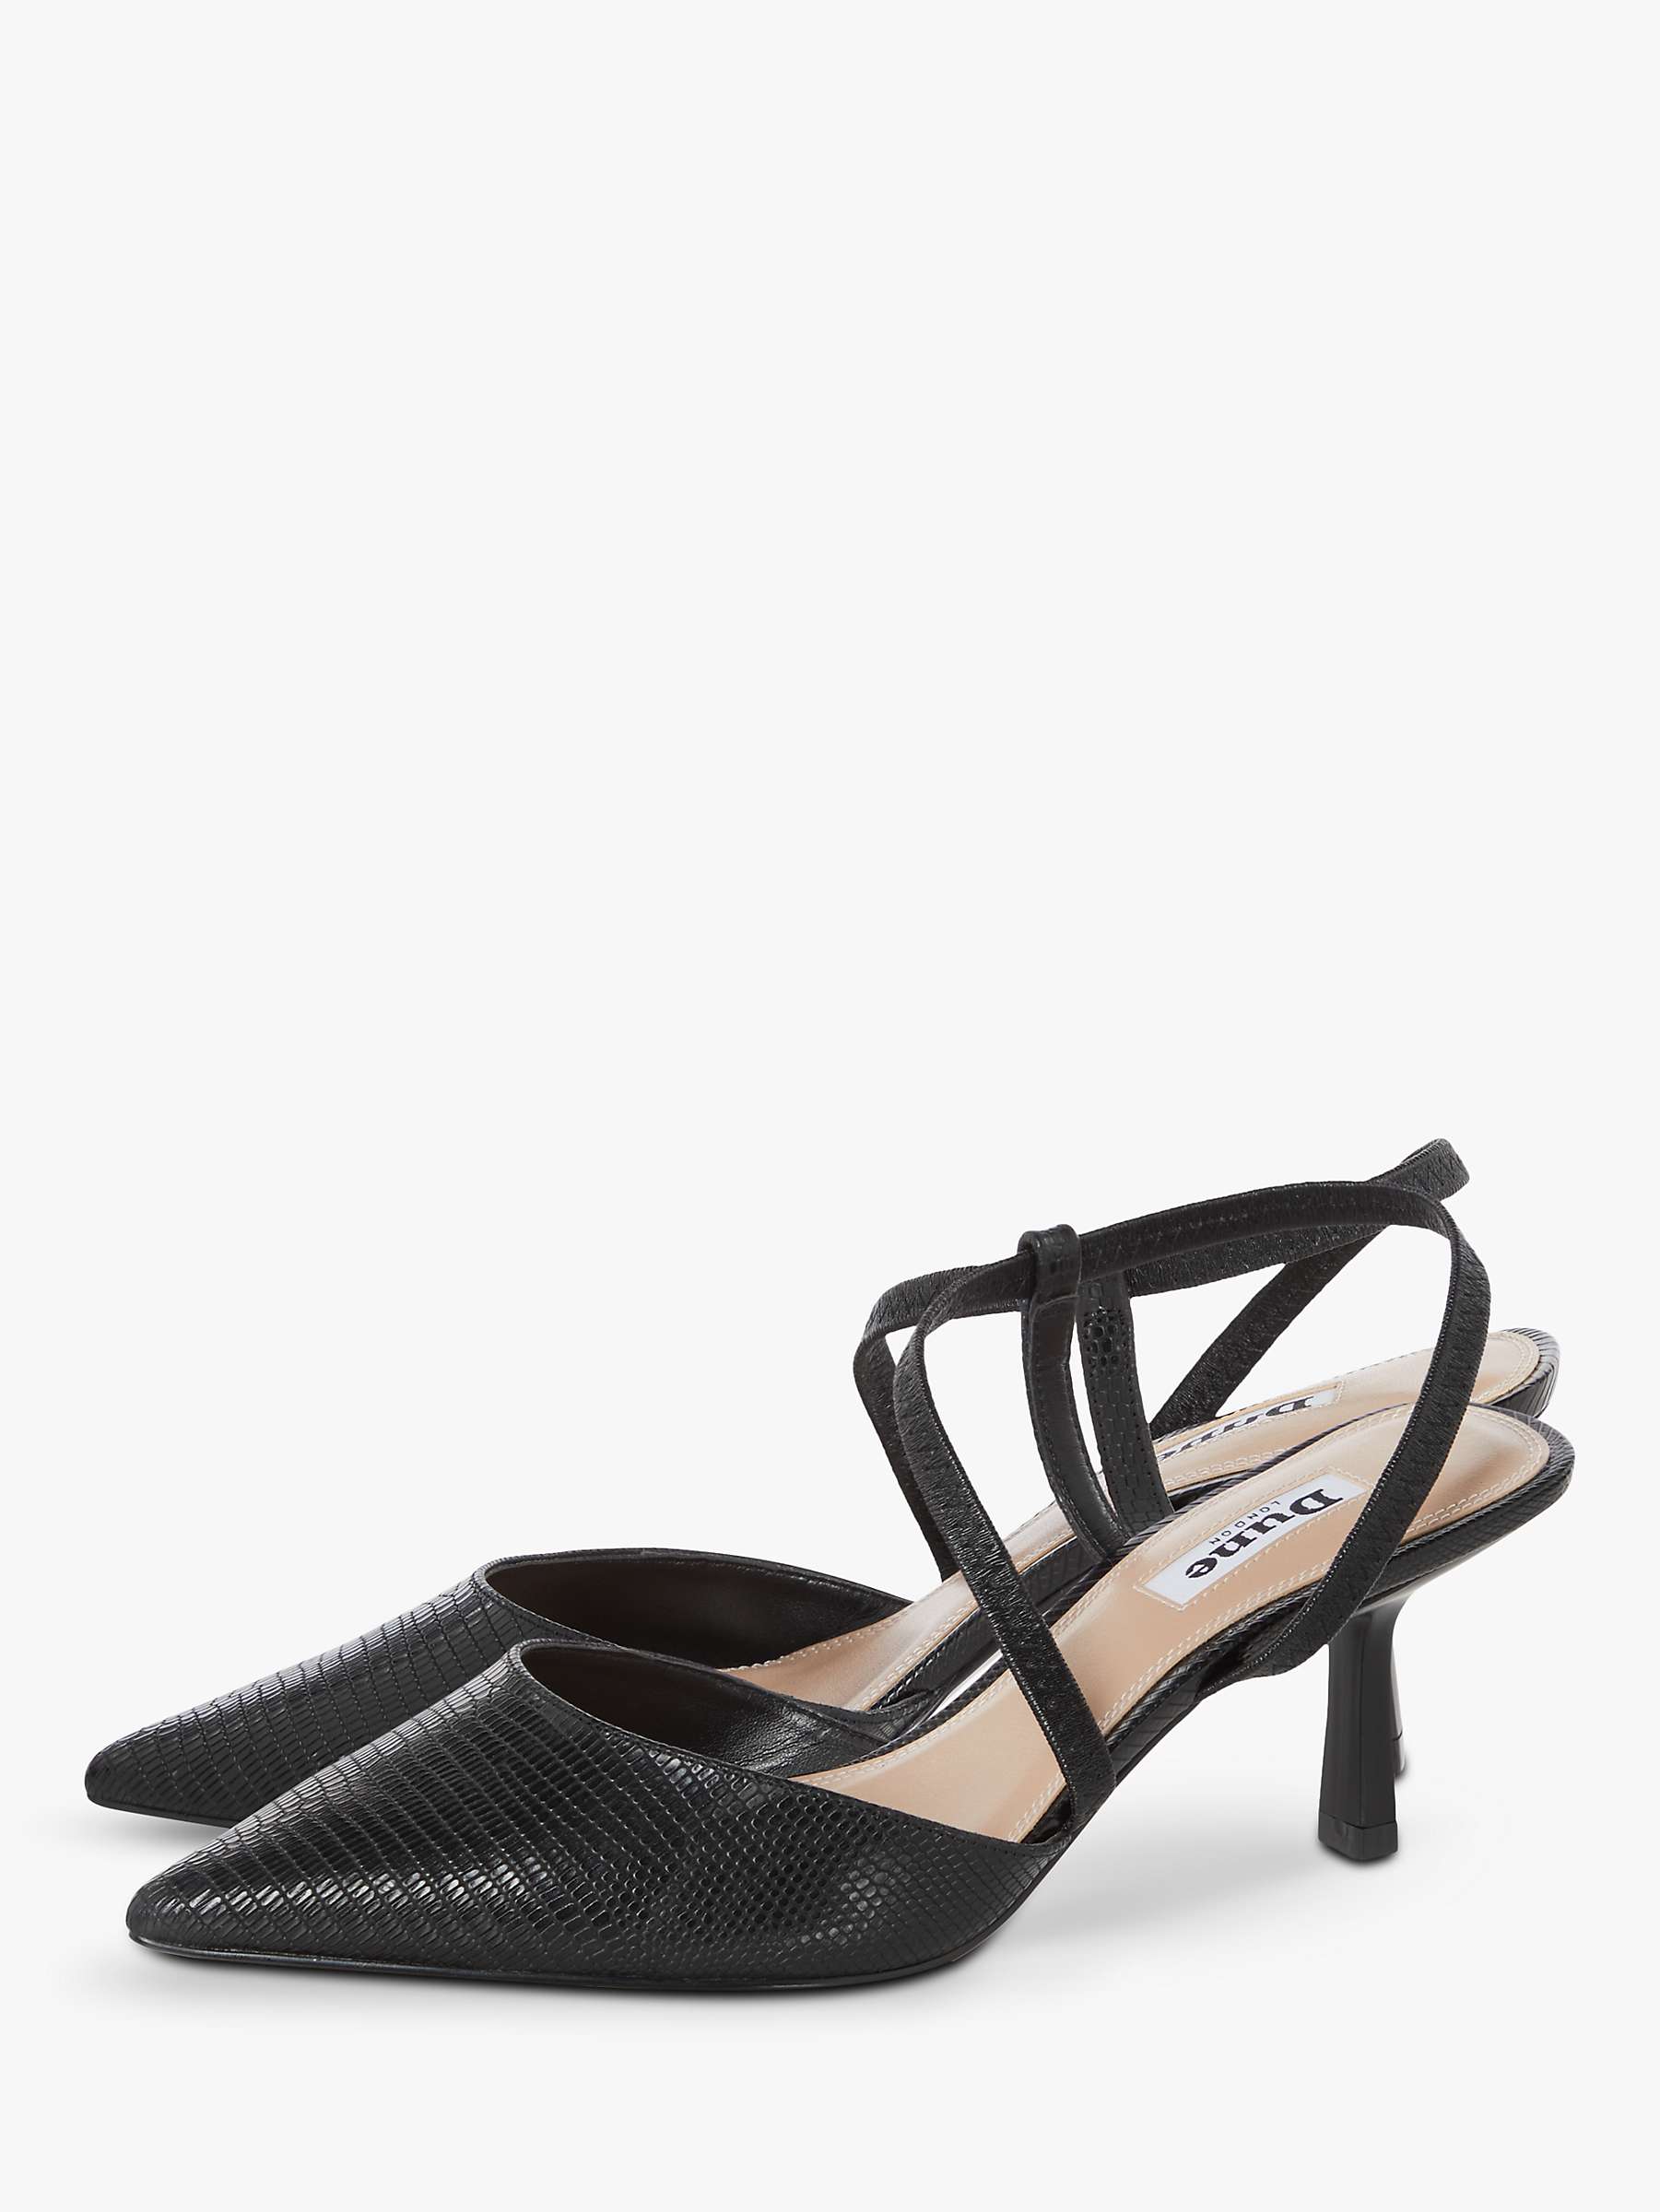 Buy Dune Columbia Leather Court Shoes, Black Online at johnlewis.com